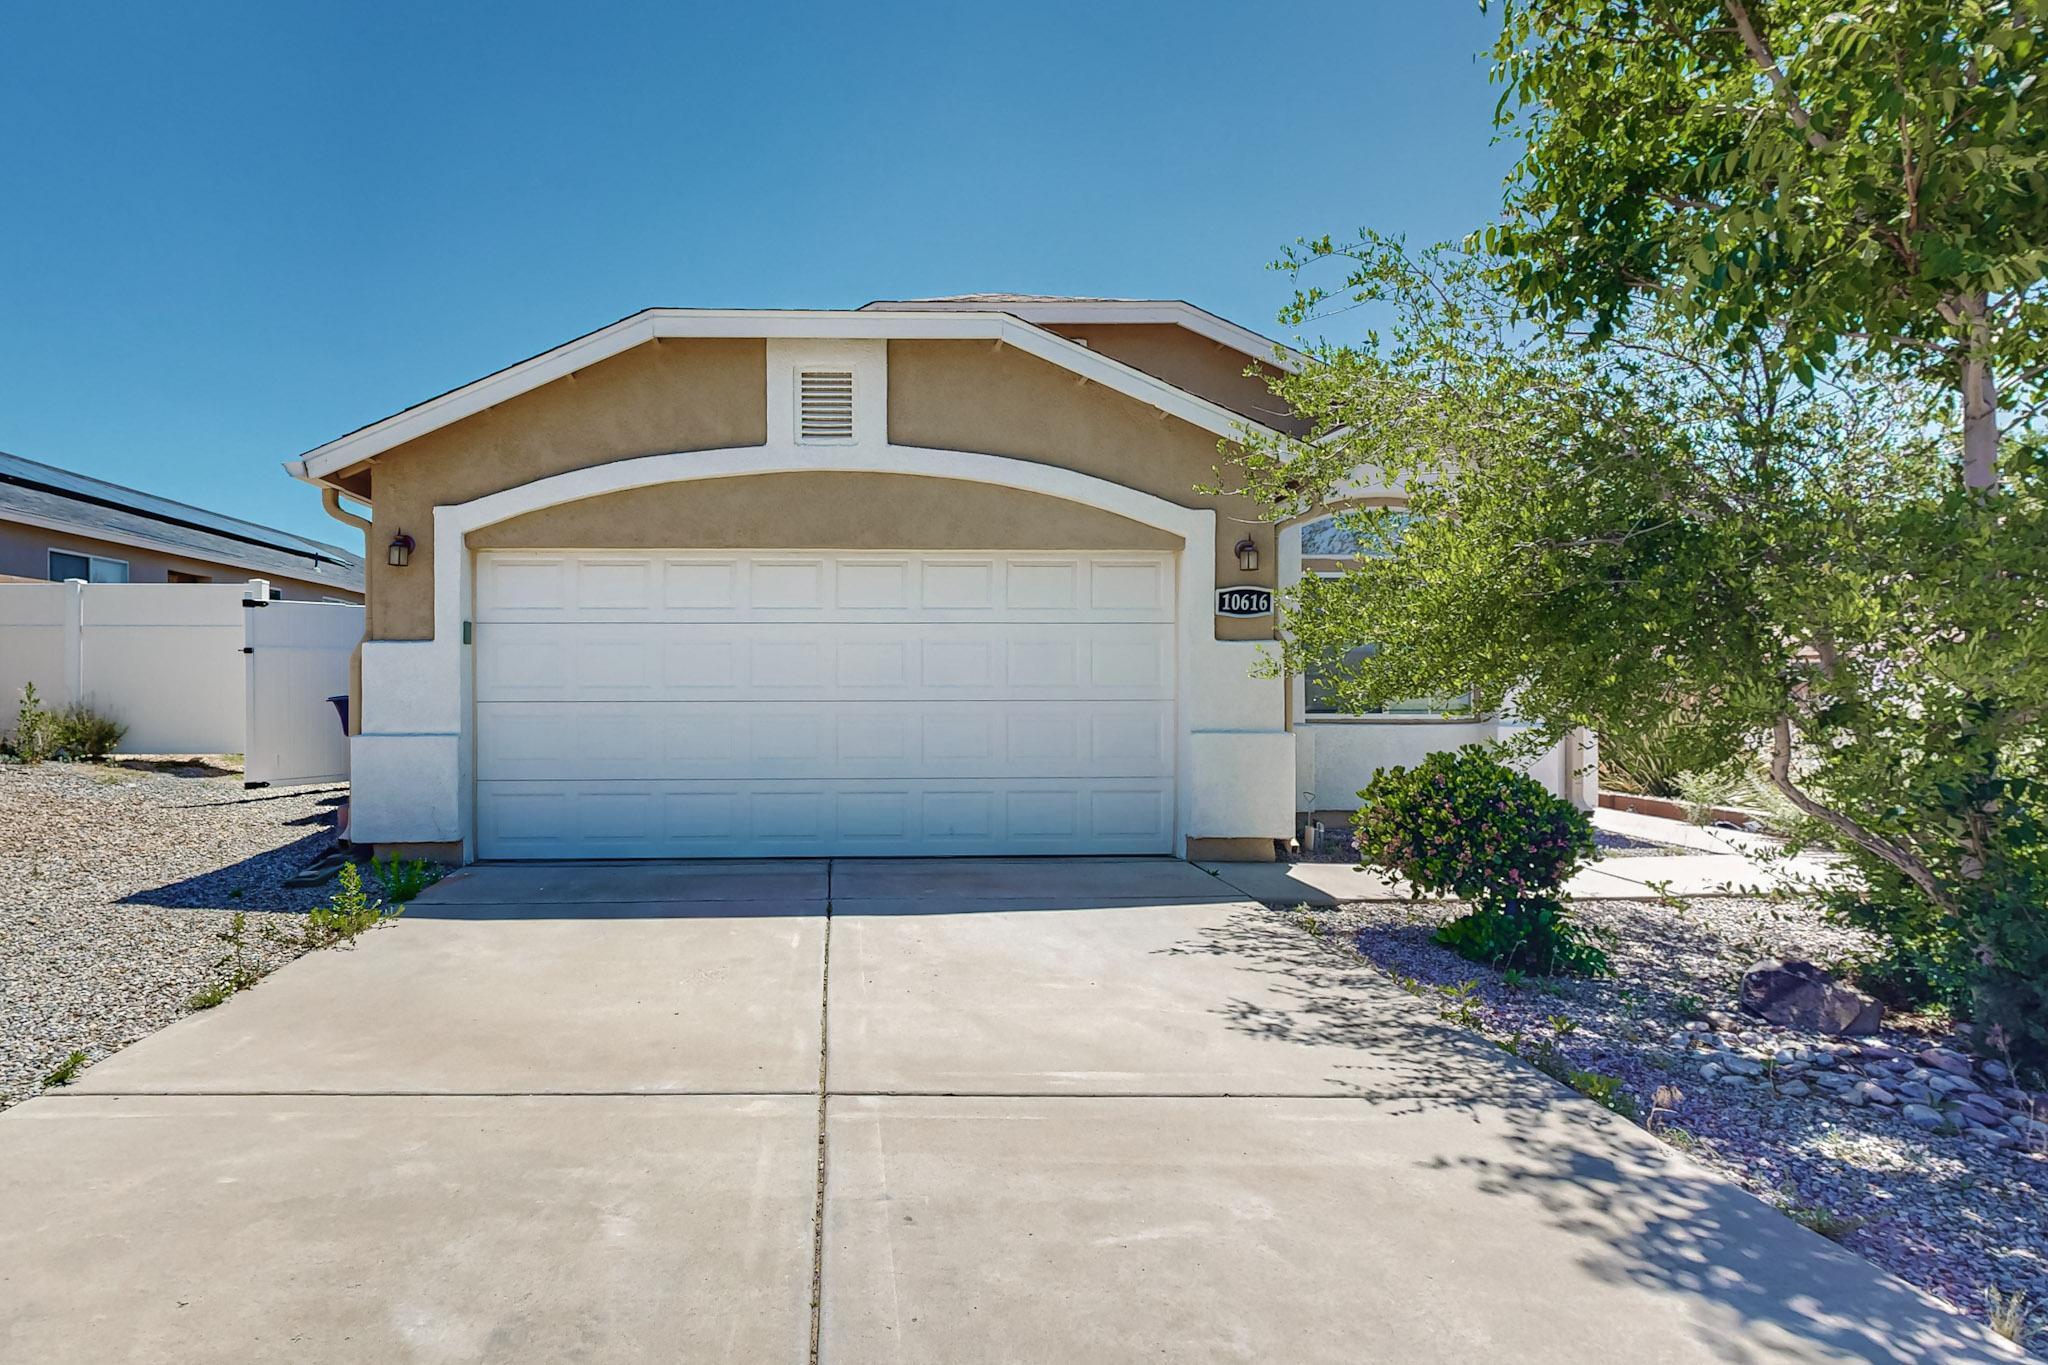 OPEN HOUSE SATURDAY JUNE 22 FROM 11:00-1:00 PM!!! NO HOA! Move-in ready 4-bedroom, 2-bath home boasts vaulted ceilings, and large windows make this home light and bright! The open kitchen features ample counter and cabinet space, a gas stove, fridge, and a breakfast bar. The family room includes a gas fireplace. The primary bedroom offers dual closets, dual sinks, and a tub/shower combo. Enjoy a large, private backyard, fully landscaped with a covered patio. Refrigerated A/C. Nearby top-rated schools, shopping at Unser Plaza, and beautiful parks like Paradise Skies and Seville Park.